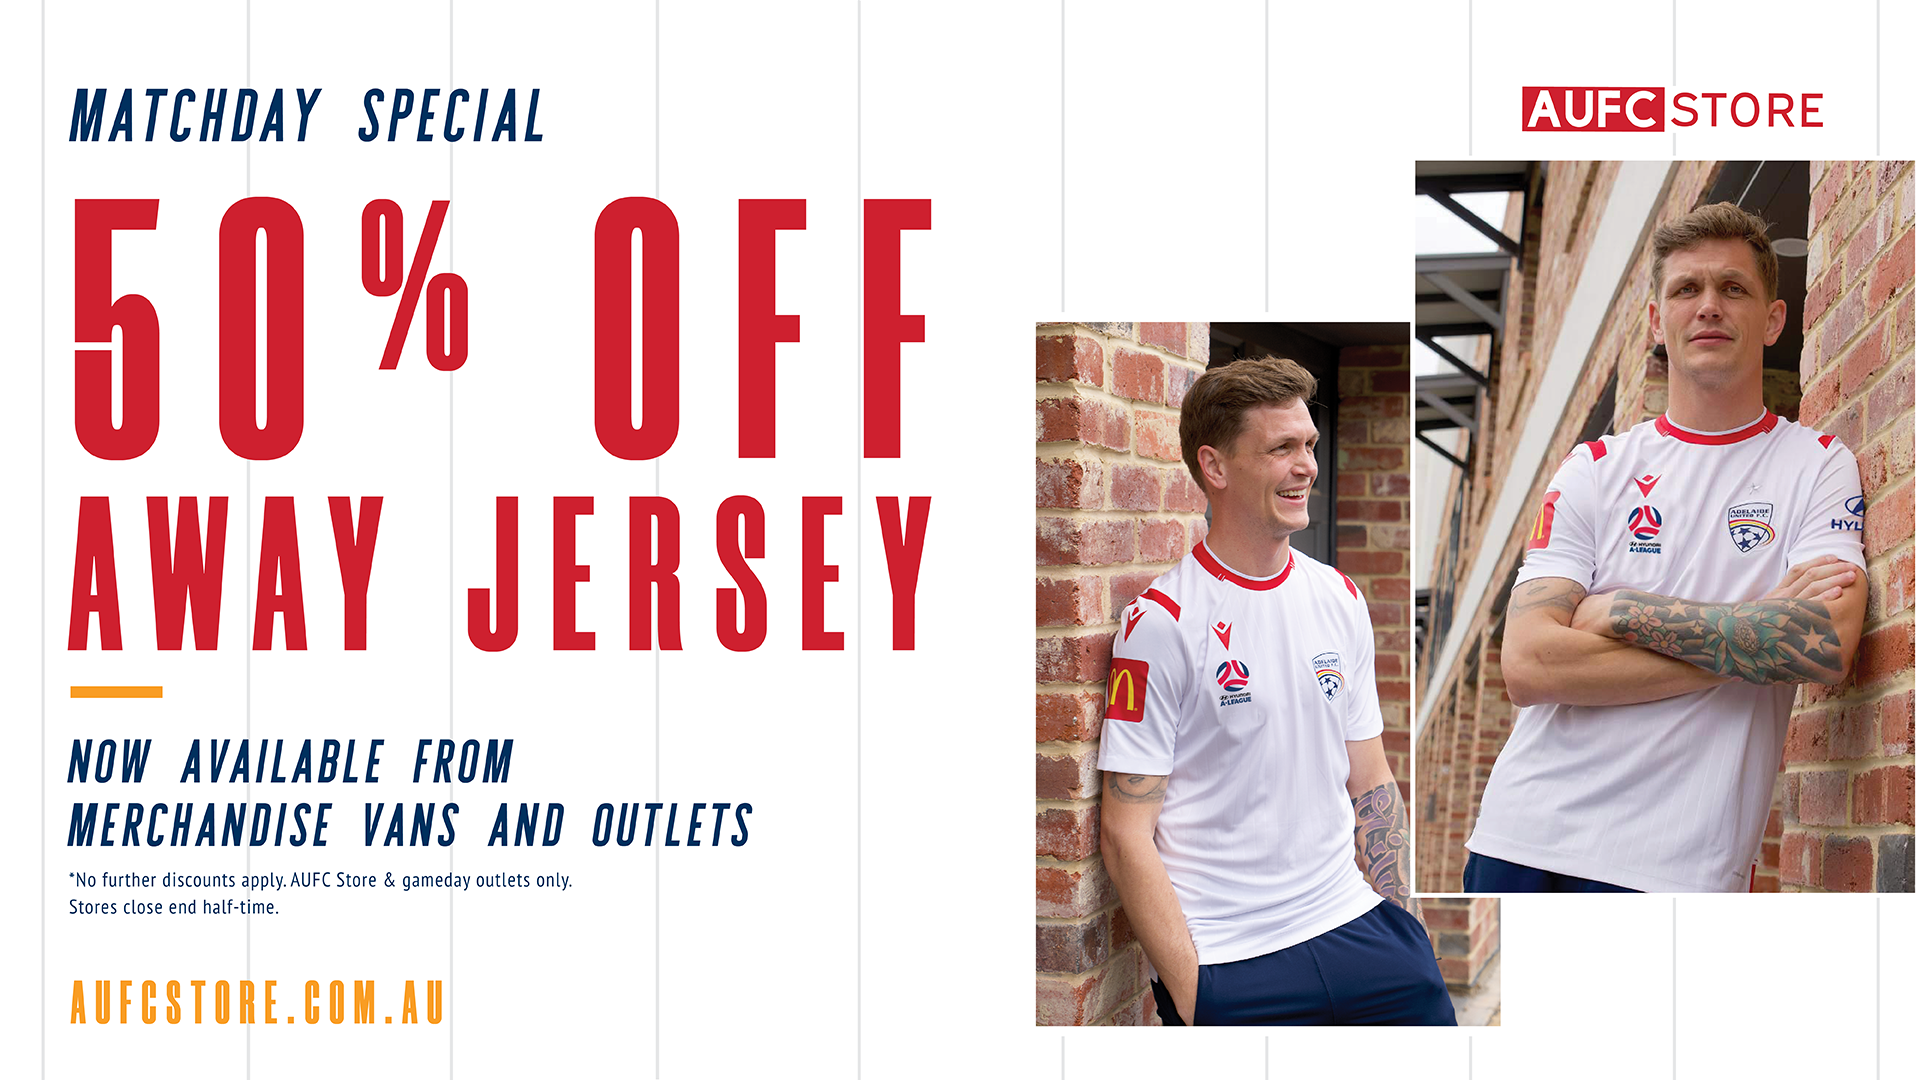 Adelaide United away jersey 50% off